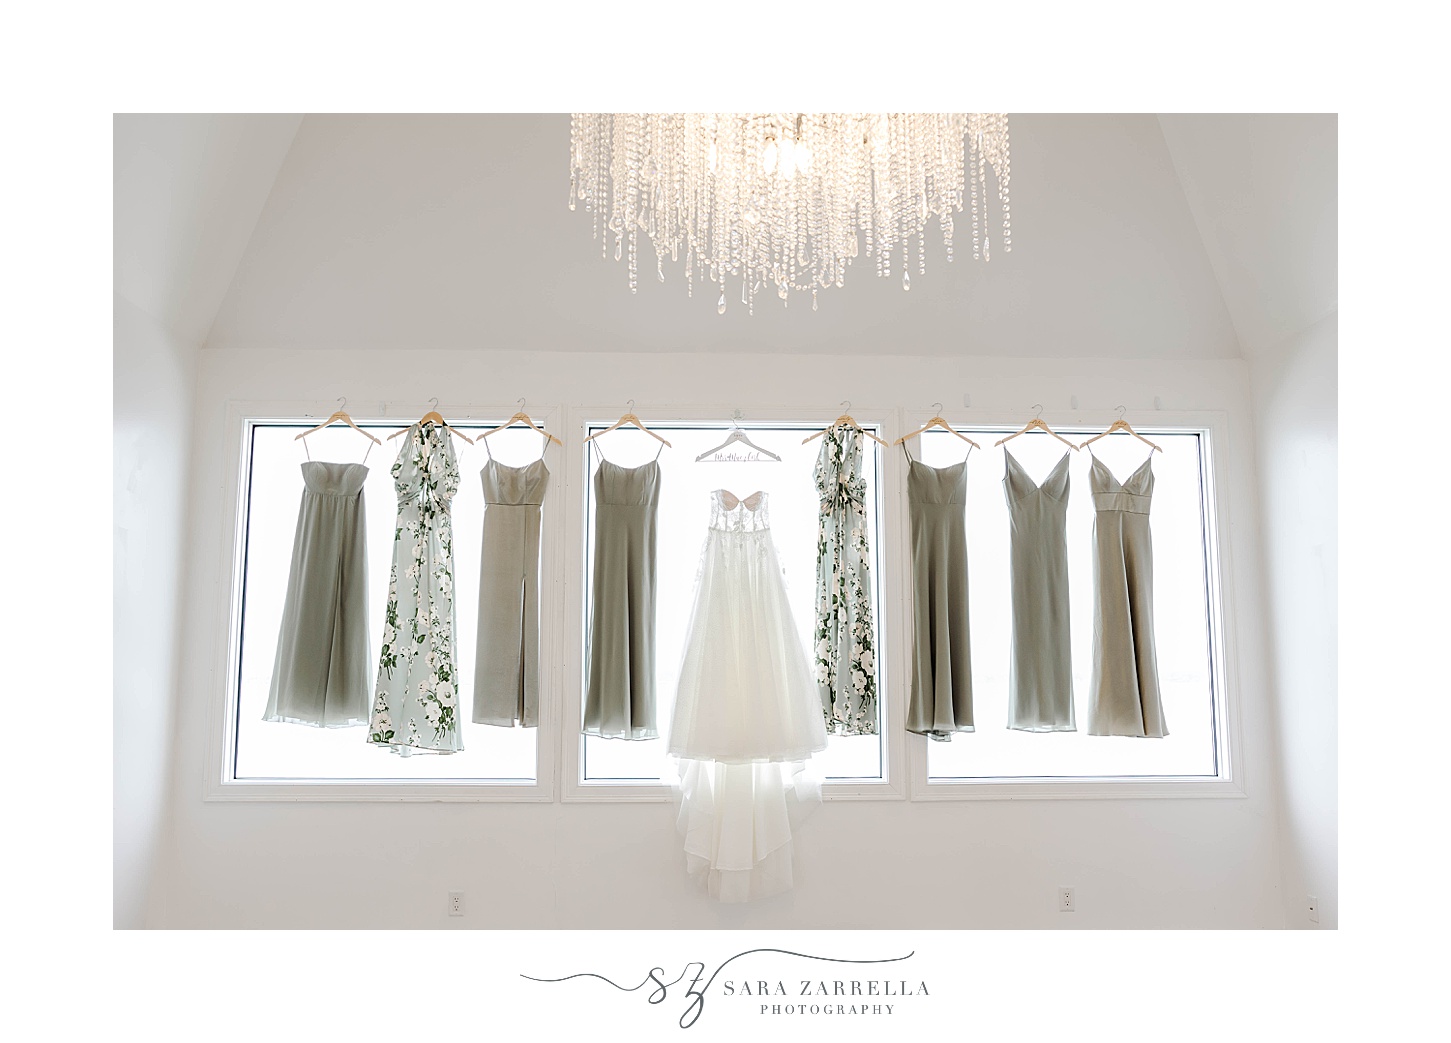 bride's dress hangs in window with bridesmaids gowns in mismatched shades of green